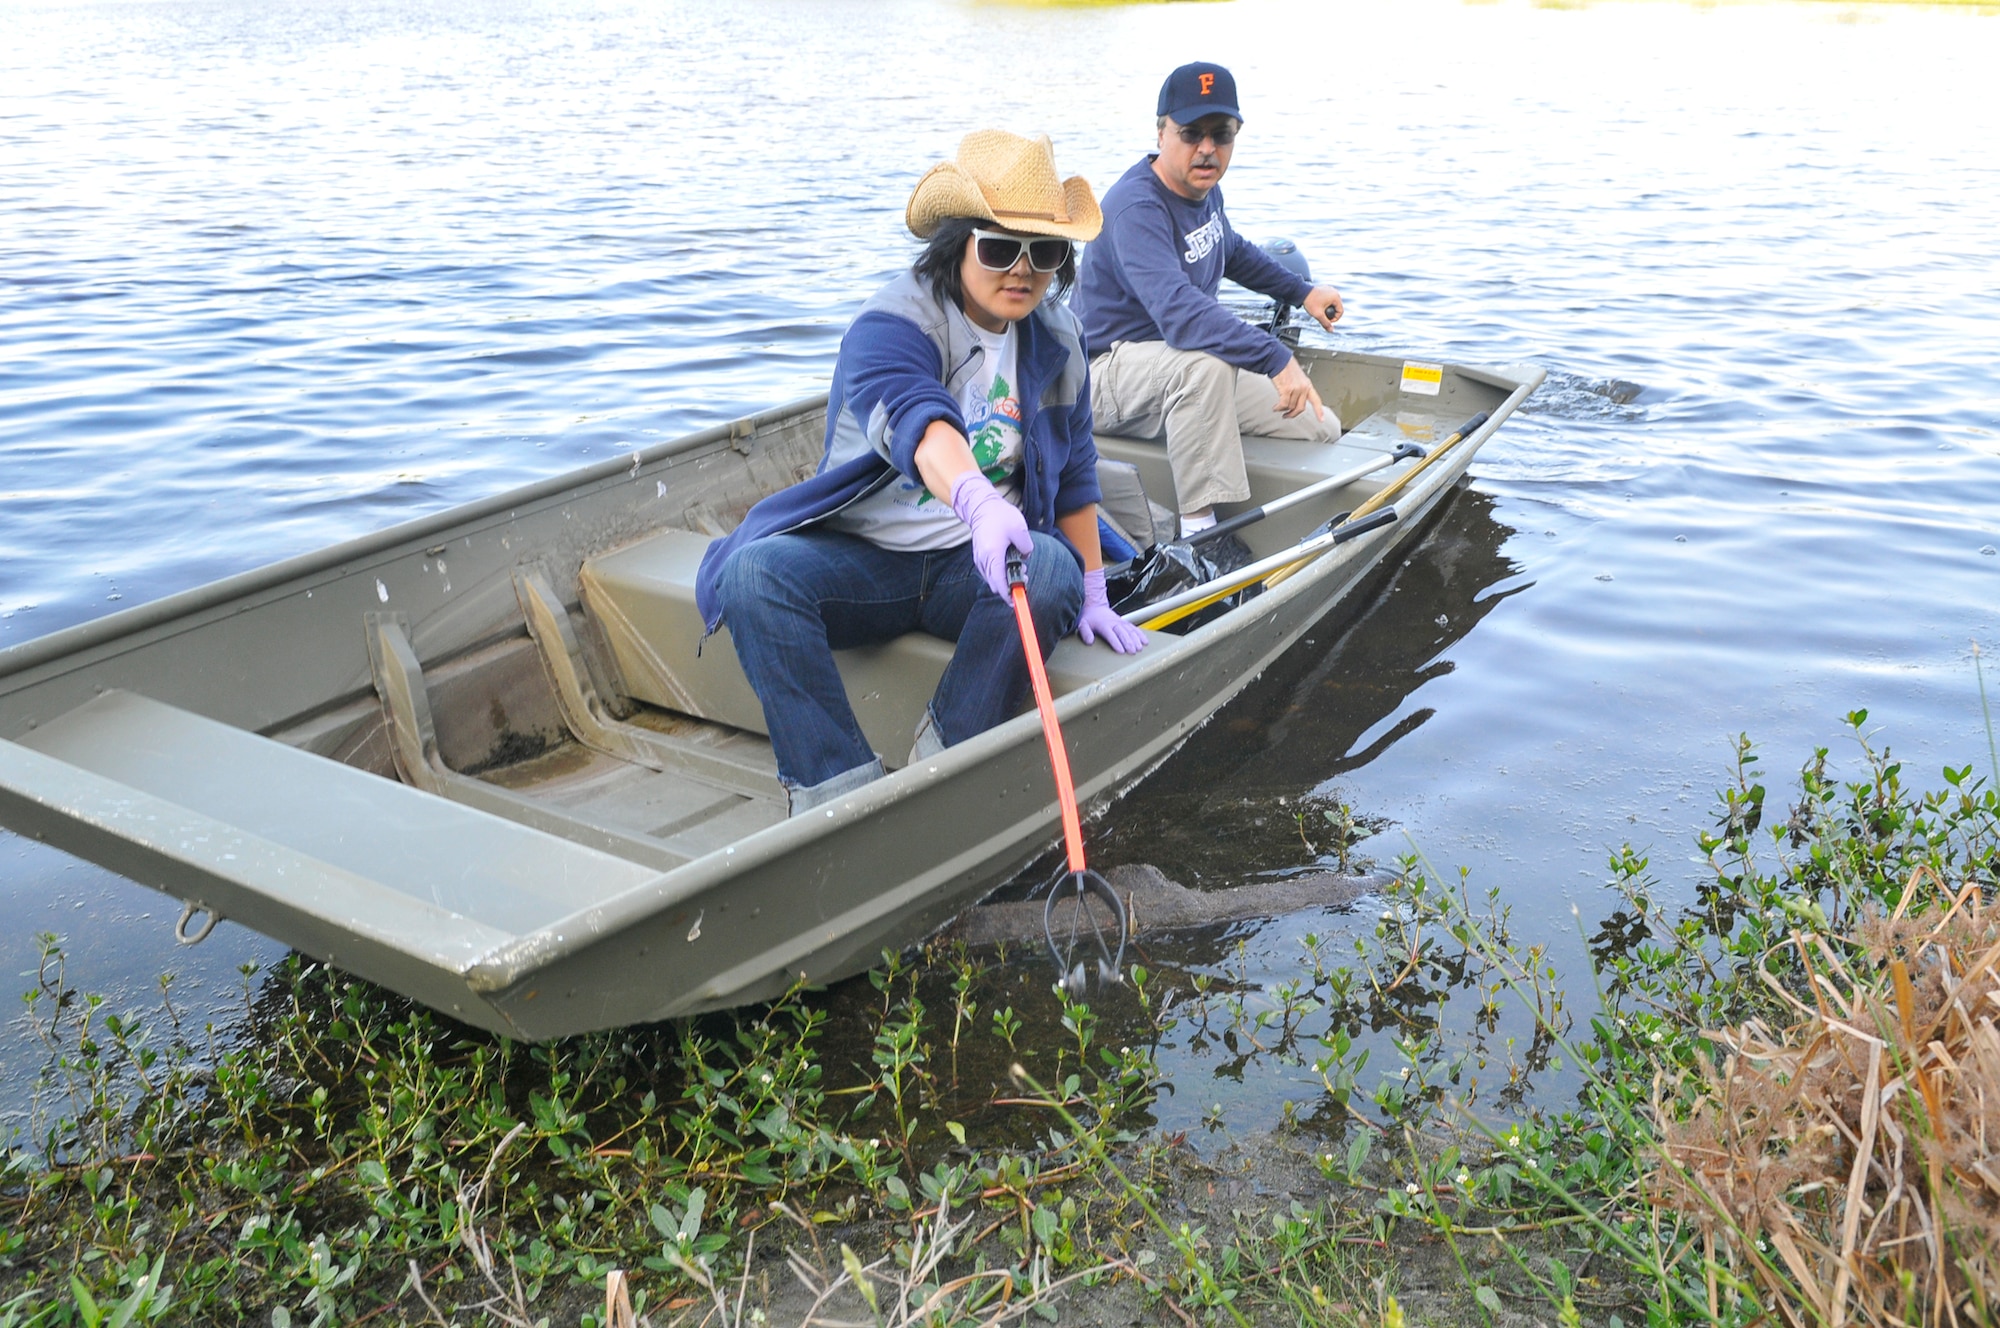 Esther Lee-Altman and Bob Sargent, 78th Civil Engineer Group, use a boat to collect debris from Scout Lake Wednesday. The clean-up was part of the Robins Air Force Base Earth Day Celebration events.( U. S. Air Force photo by Sue Sapp)